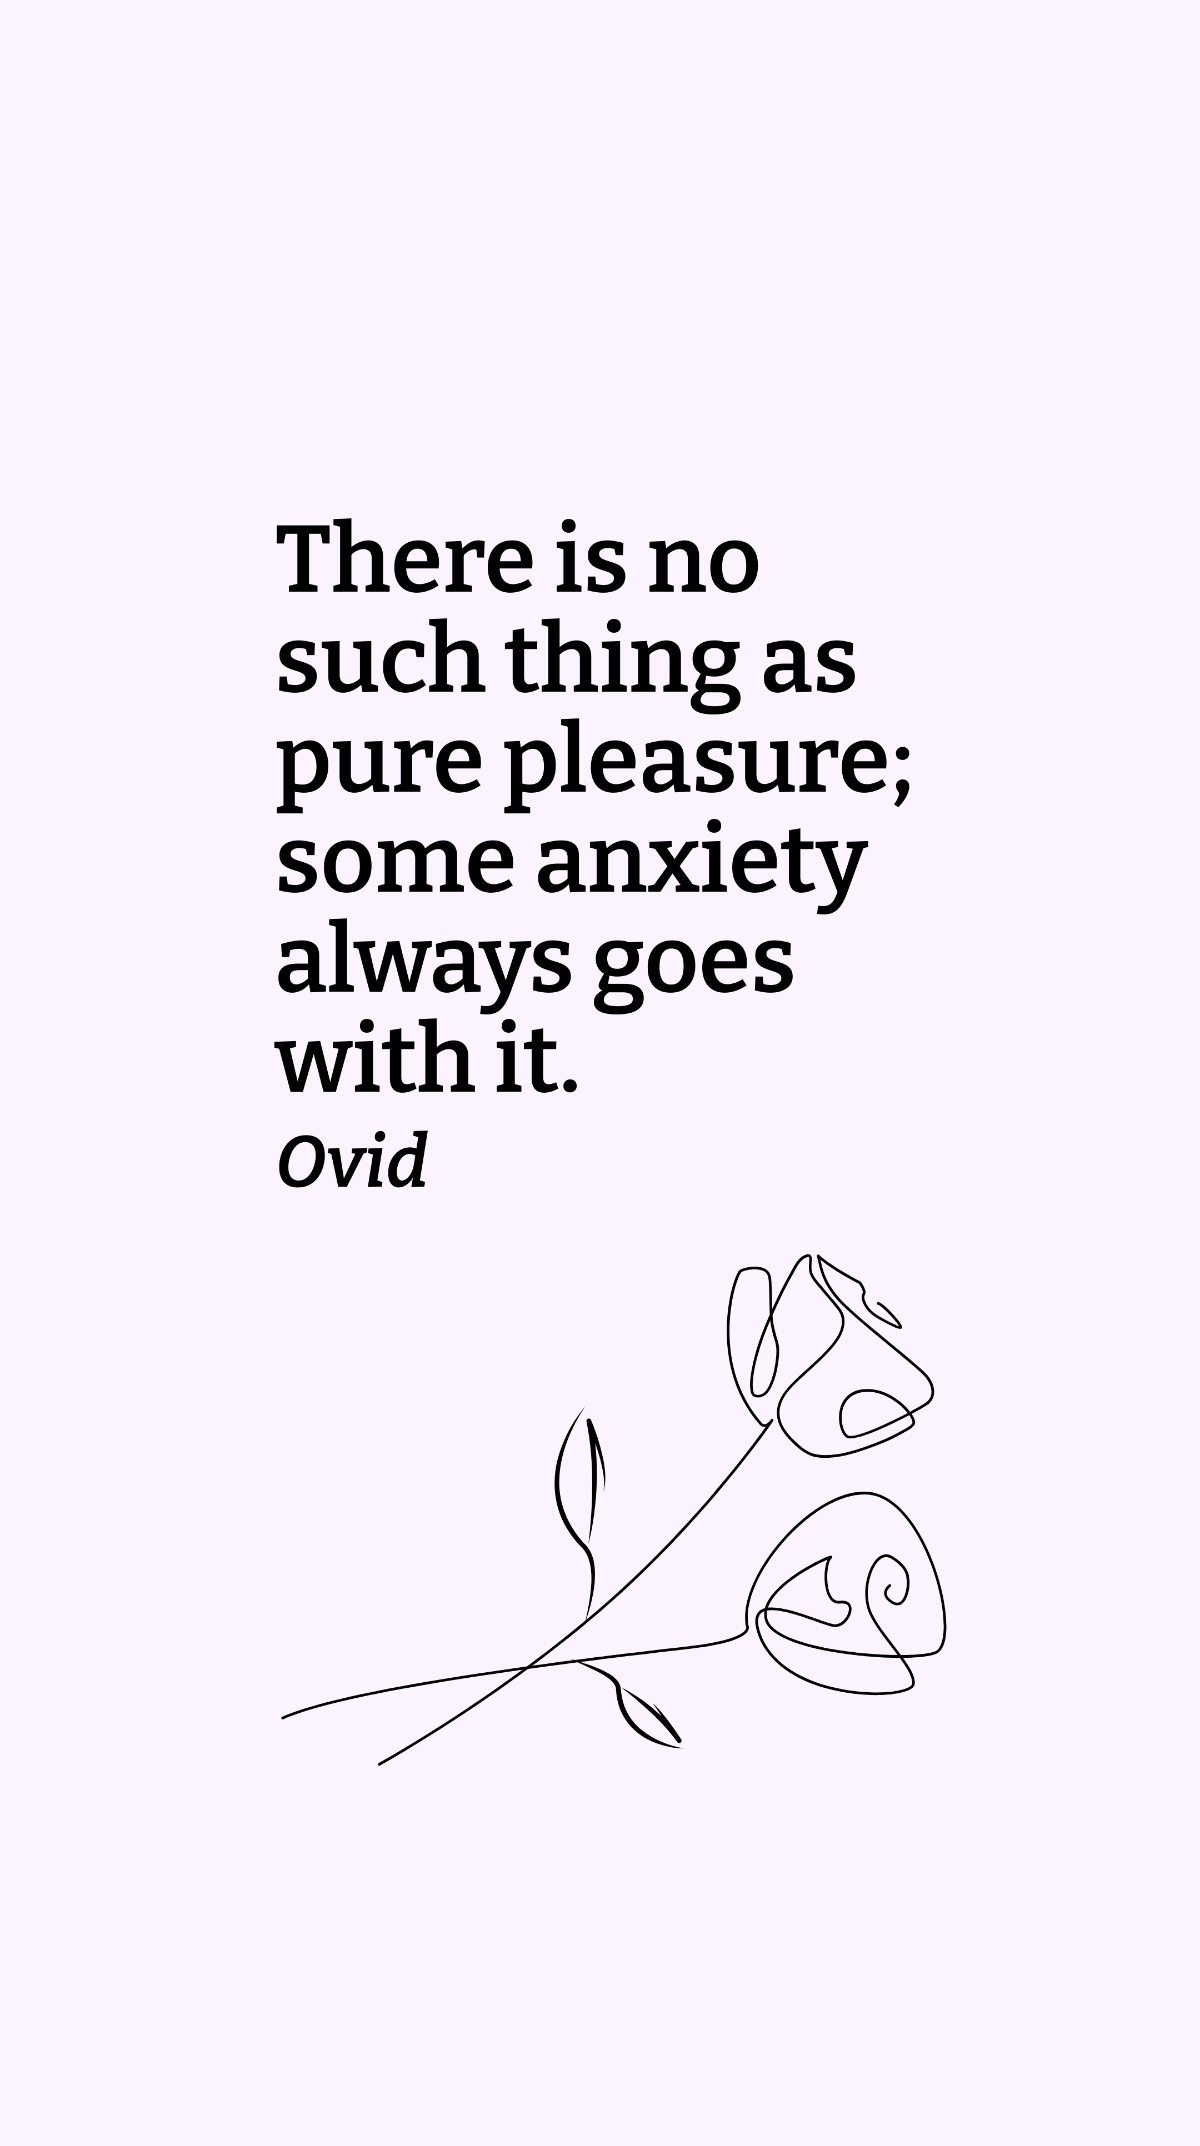 Ovid - There is no such thing as pure pleasure; some anxiety always goes with it.